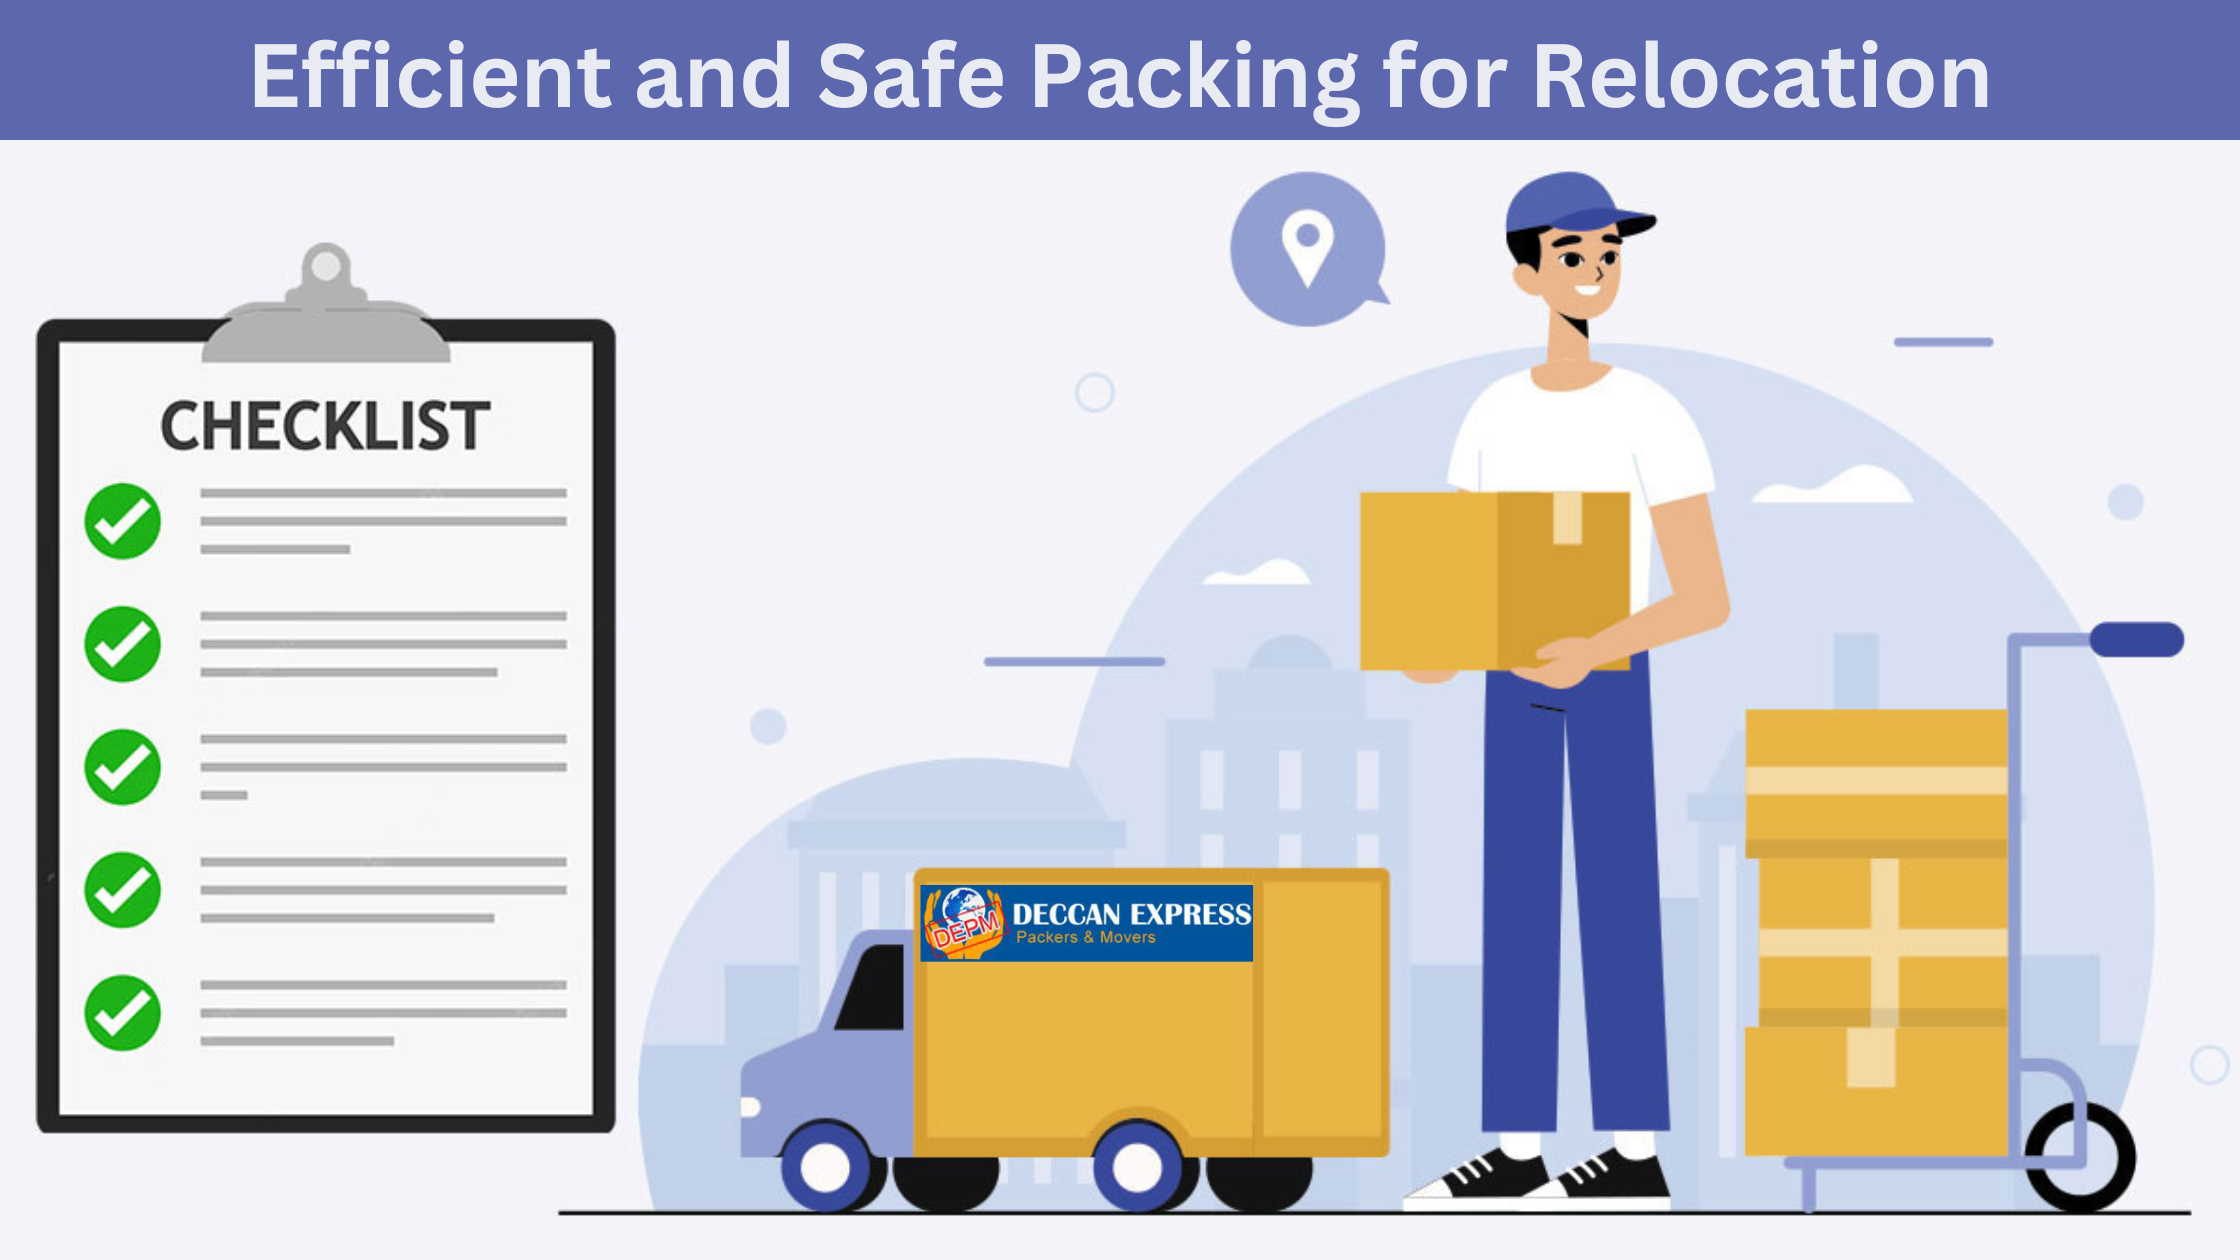 Ensuring efficient and safe packing for relocation